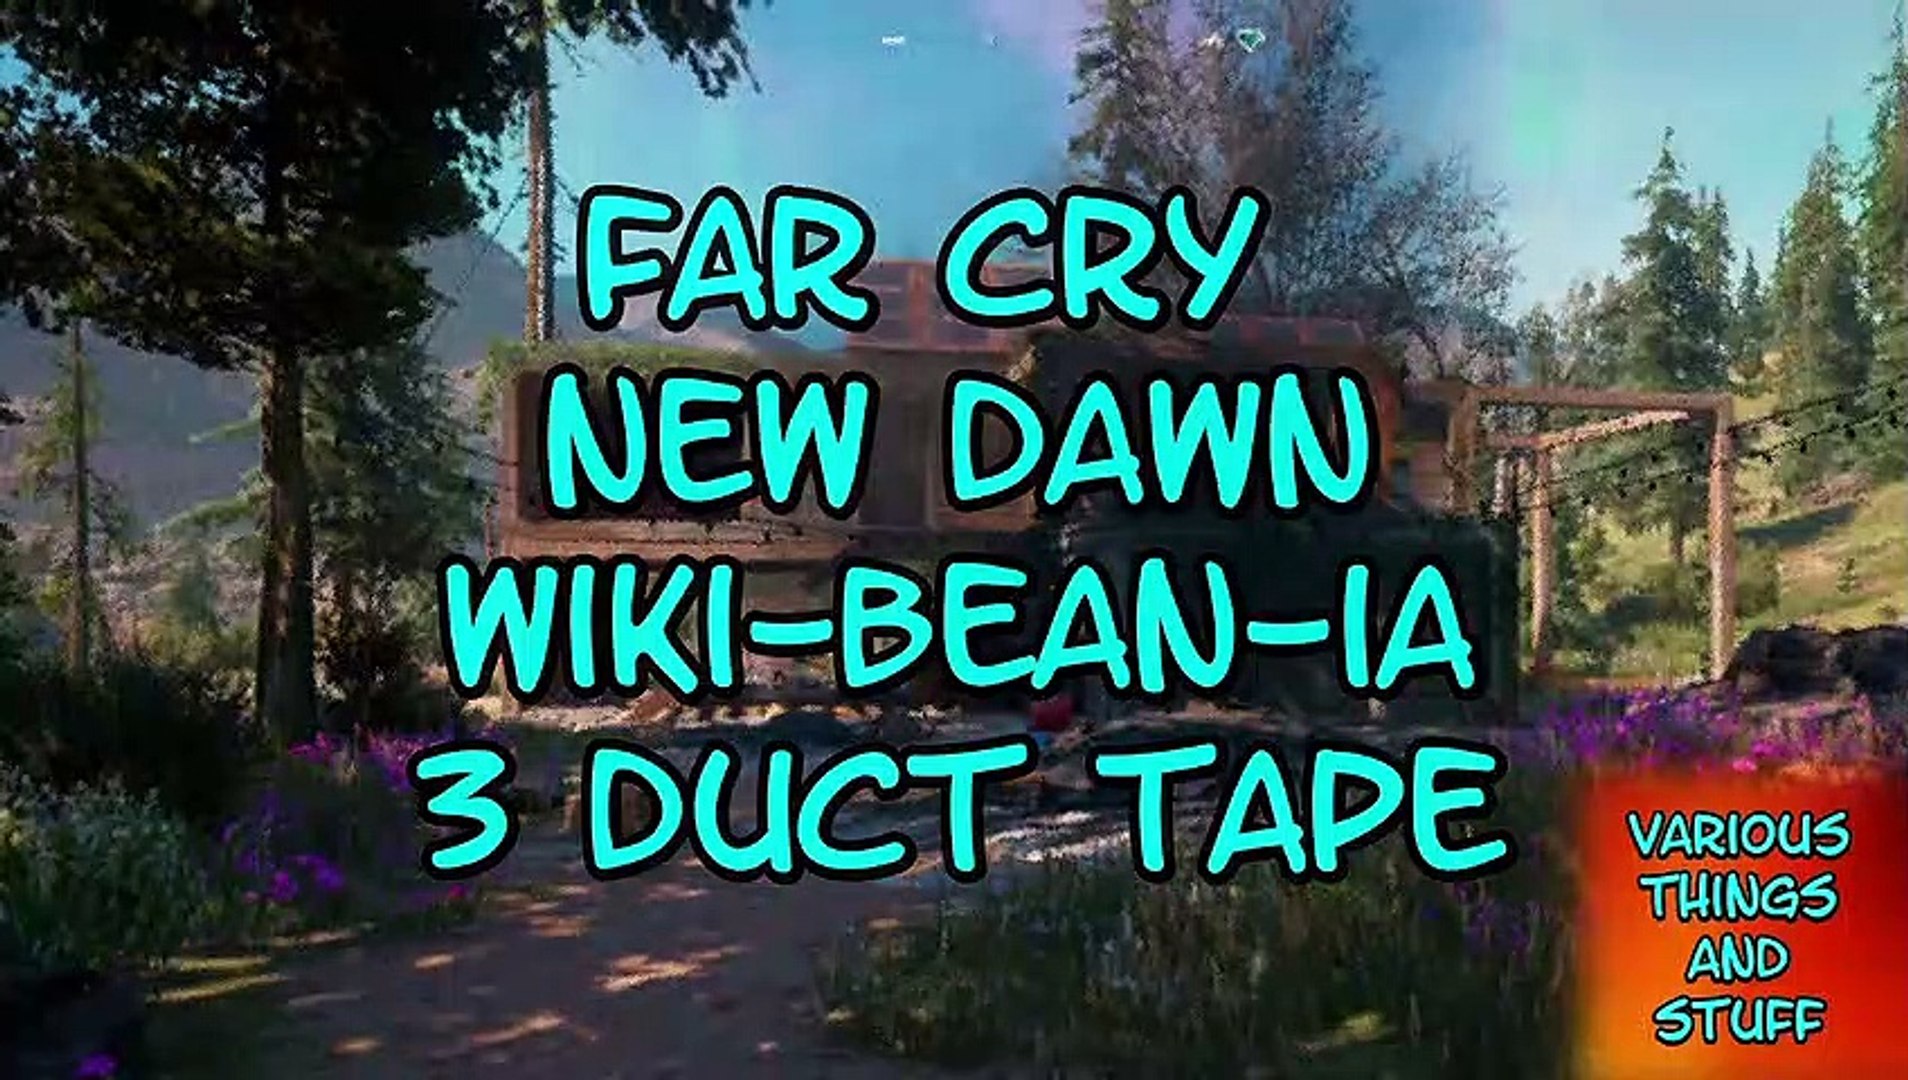 Far Cry New Dawn Wiki-Bean-ia 3 Duct Tape - video Dailymotion